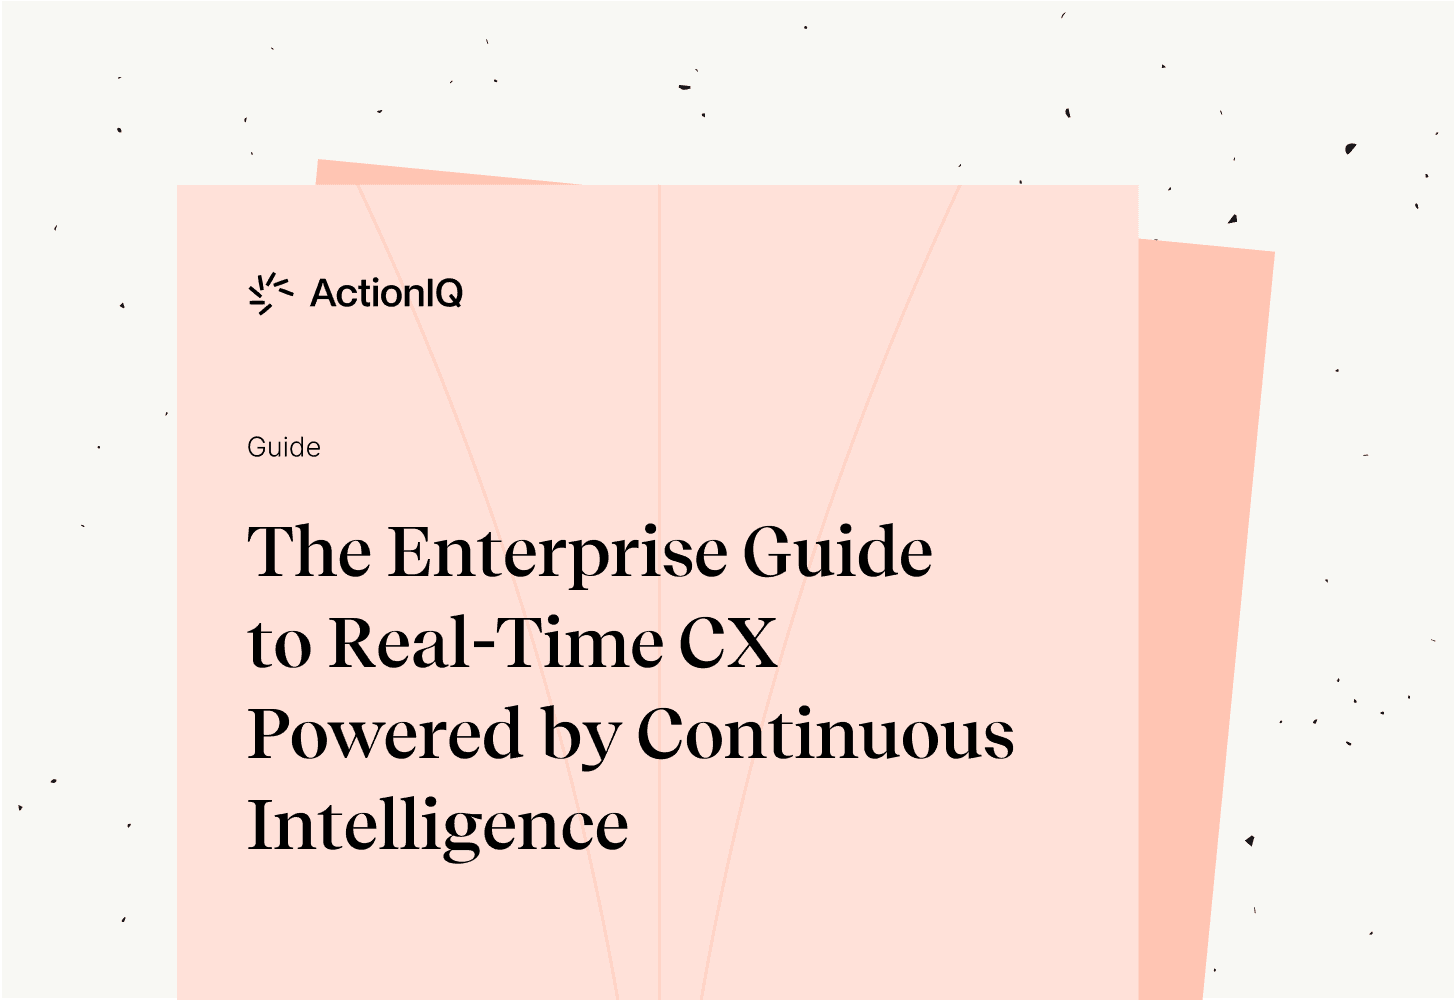 The Enterprise Guide to Real-Time CX Powered by Continuous Intelligence